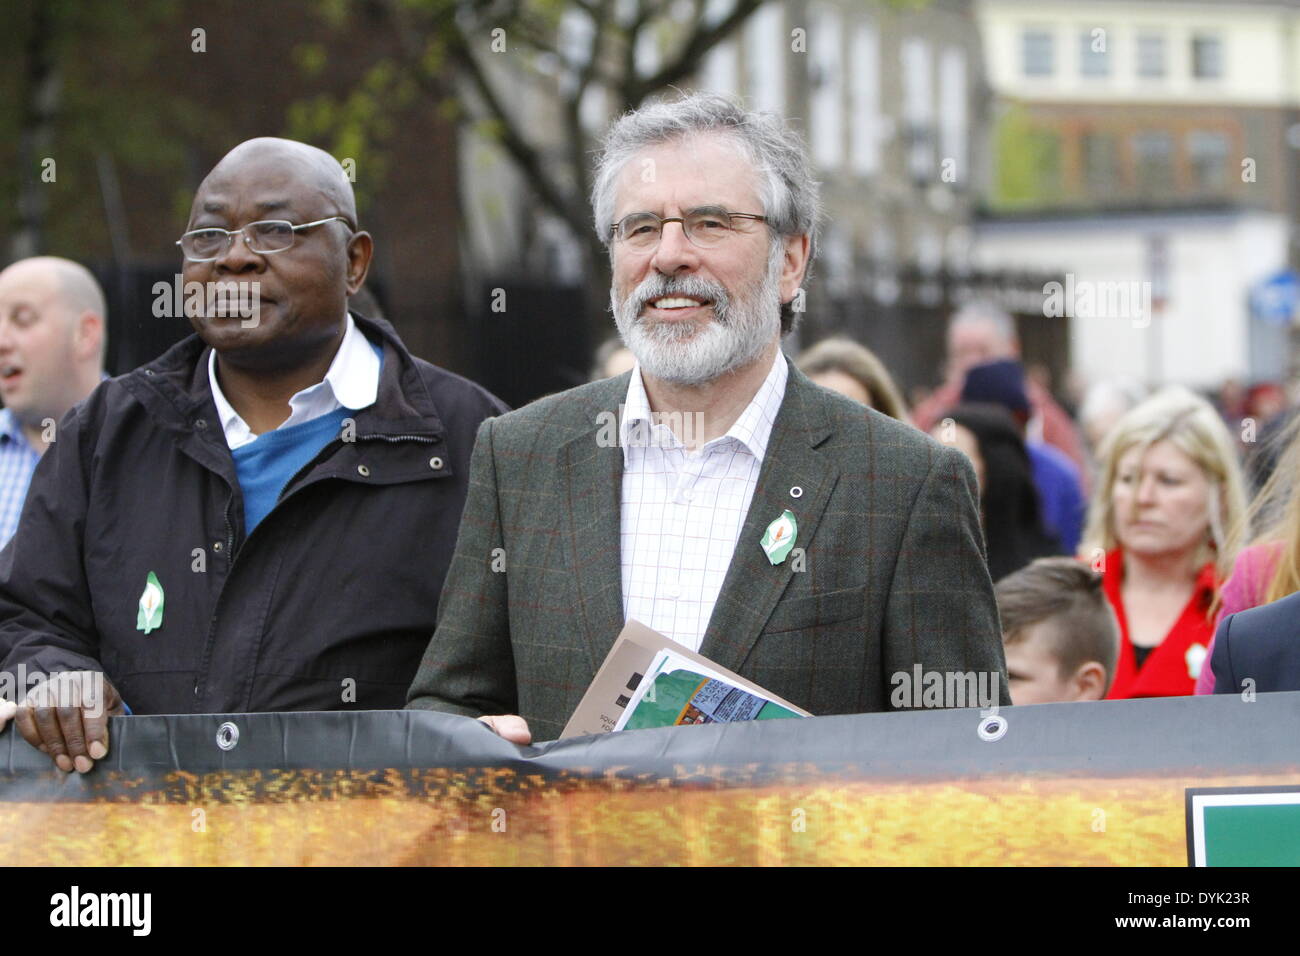 Dublin, Ireland. 20th April 2014. Sinn Fein president Gerry Adams walks on the top of the commemoration march. Sinn Fein president Gerry Adams led the Sinn Fein commemoration of the 98th anniversary of the Easter Rising of 1916. The party supporters marched from the Garden of Remembrance to the General Post office (GPO) for a rally. Credit:  Michael Debets/Alamy Live News Stock Photo